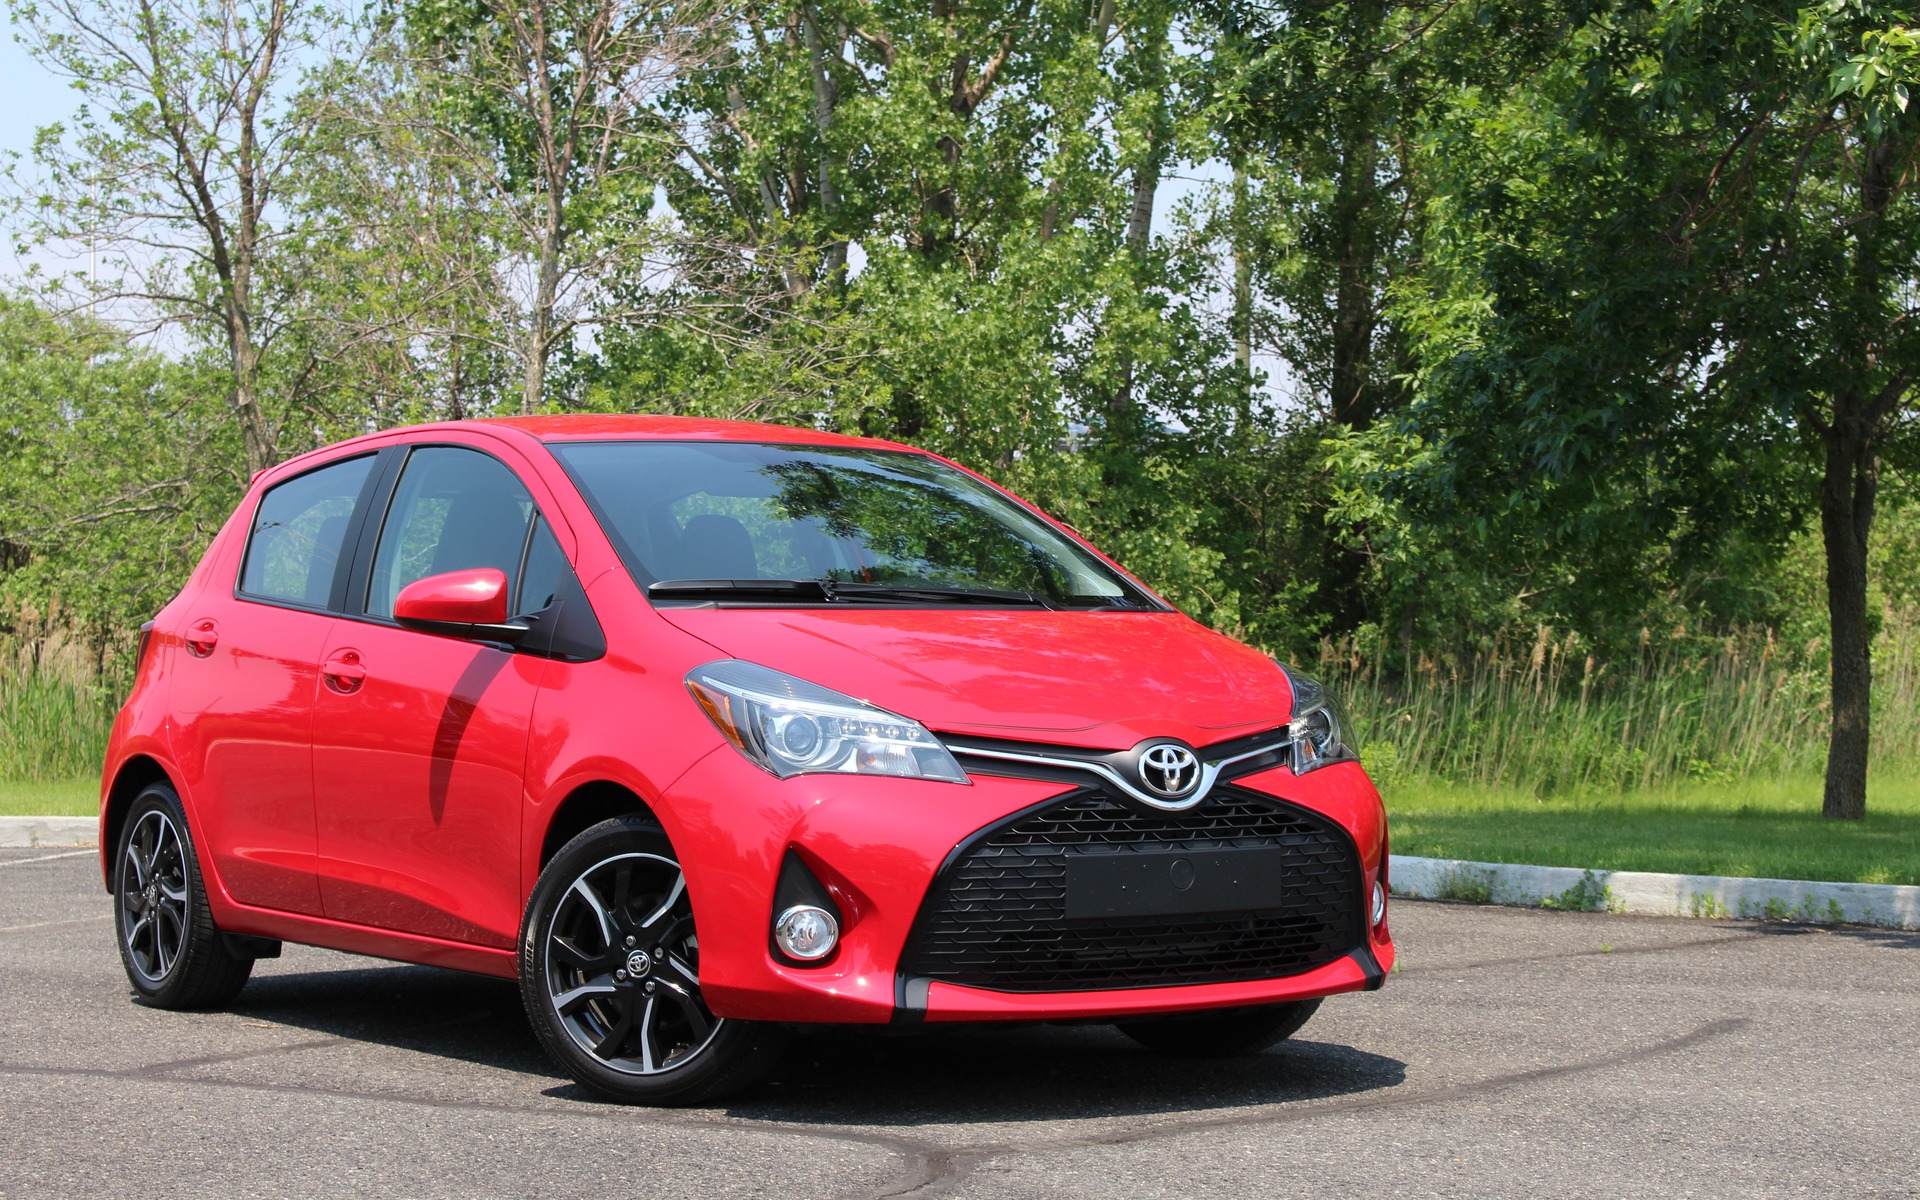 2017 Toyota Yaris Hatchback: From A to B - The Car Guide